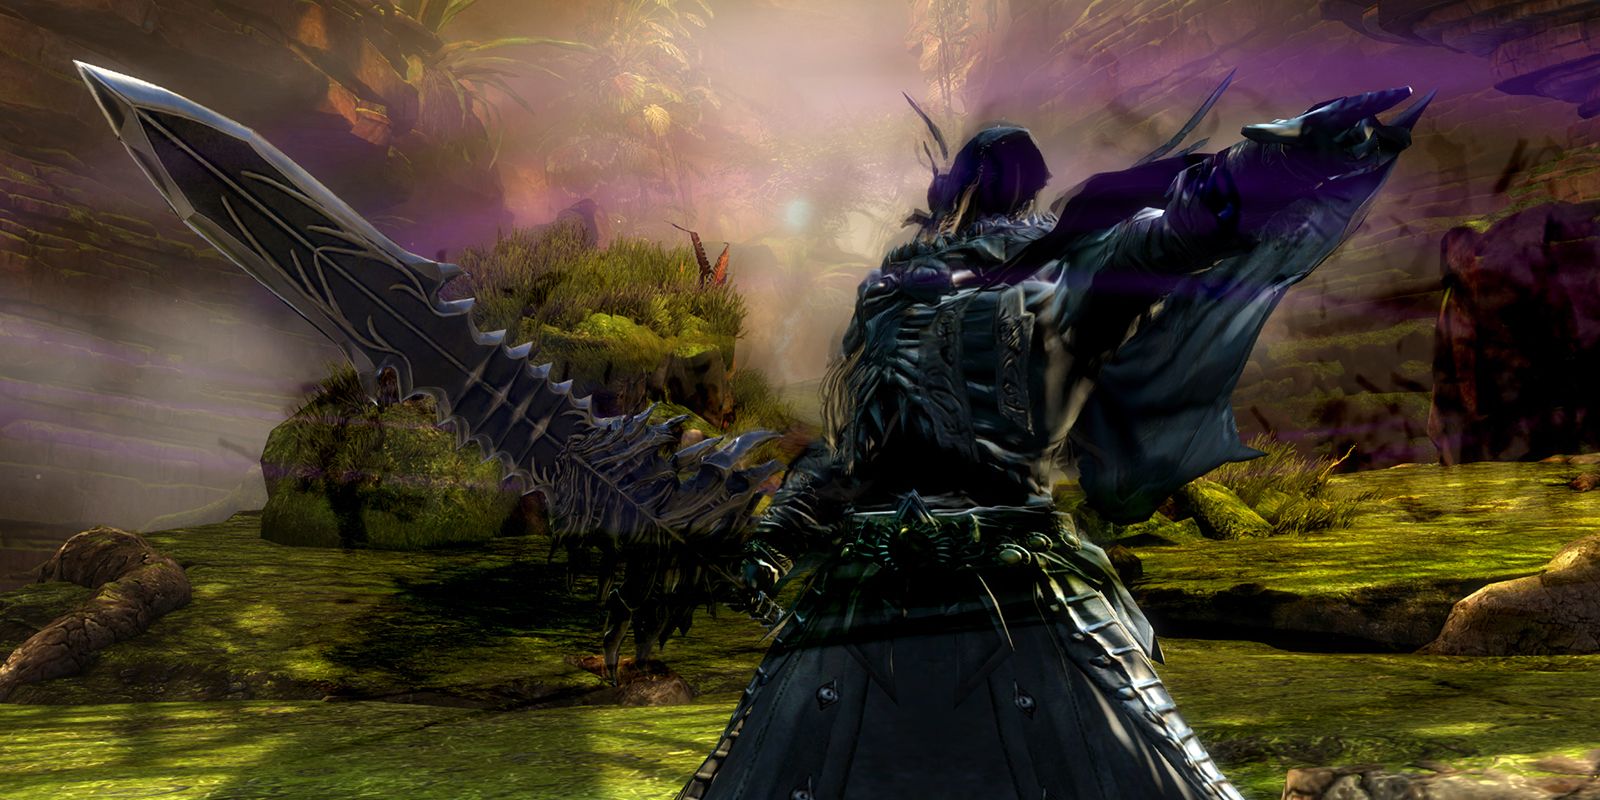 guild wars 2 free character transfer